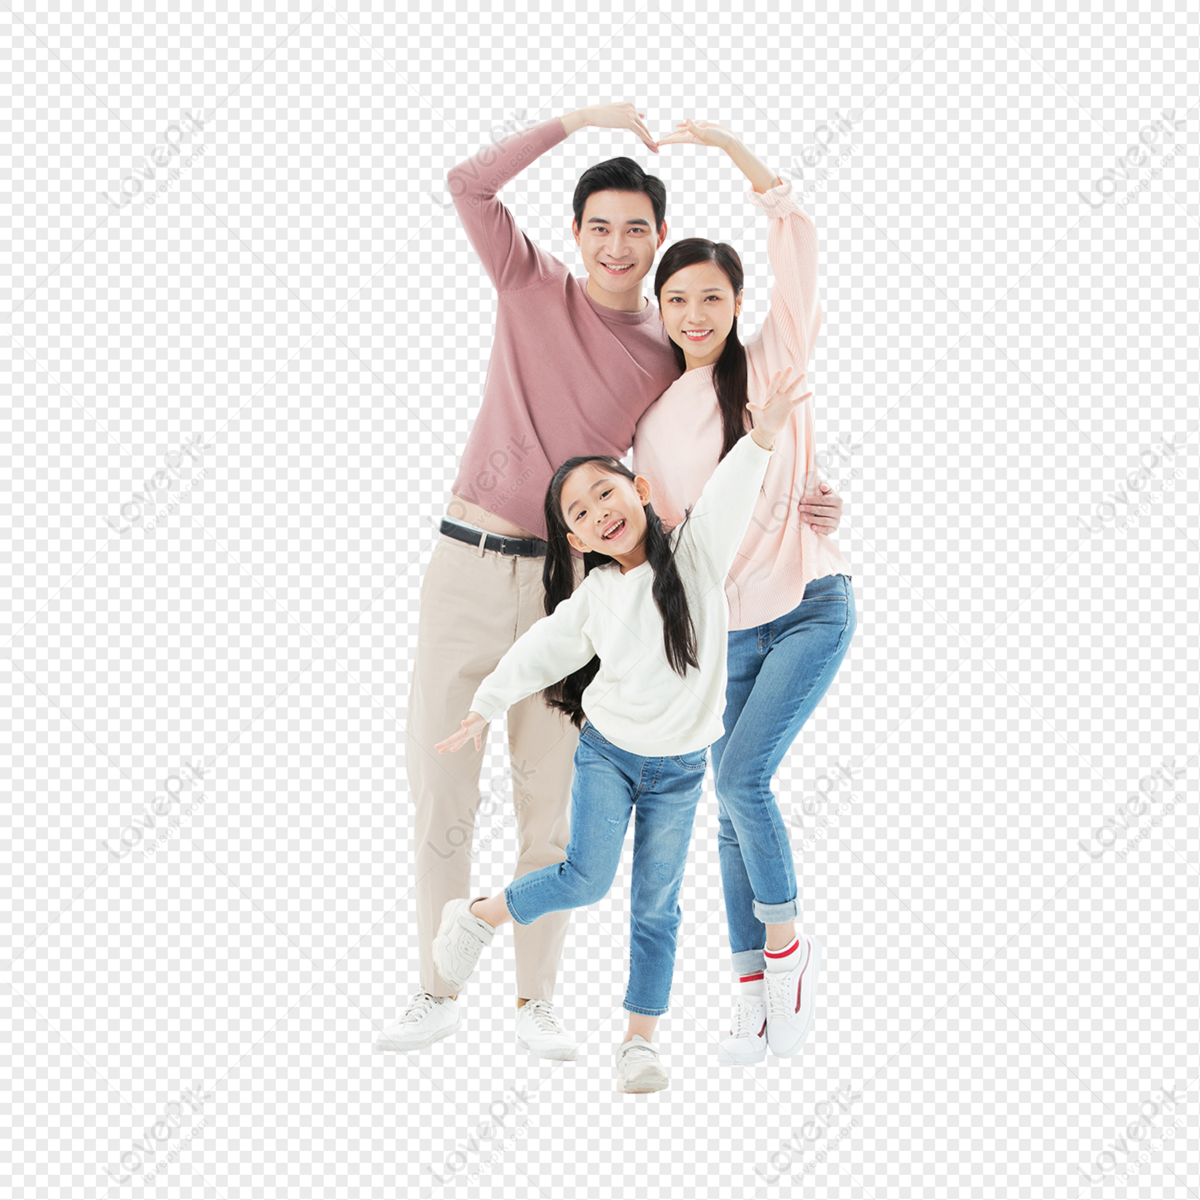 Happy Family Of Three PNG Transparent Background And Clipart Image For Free  Download - Lovepik | 401667610